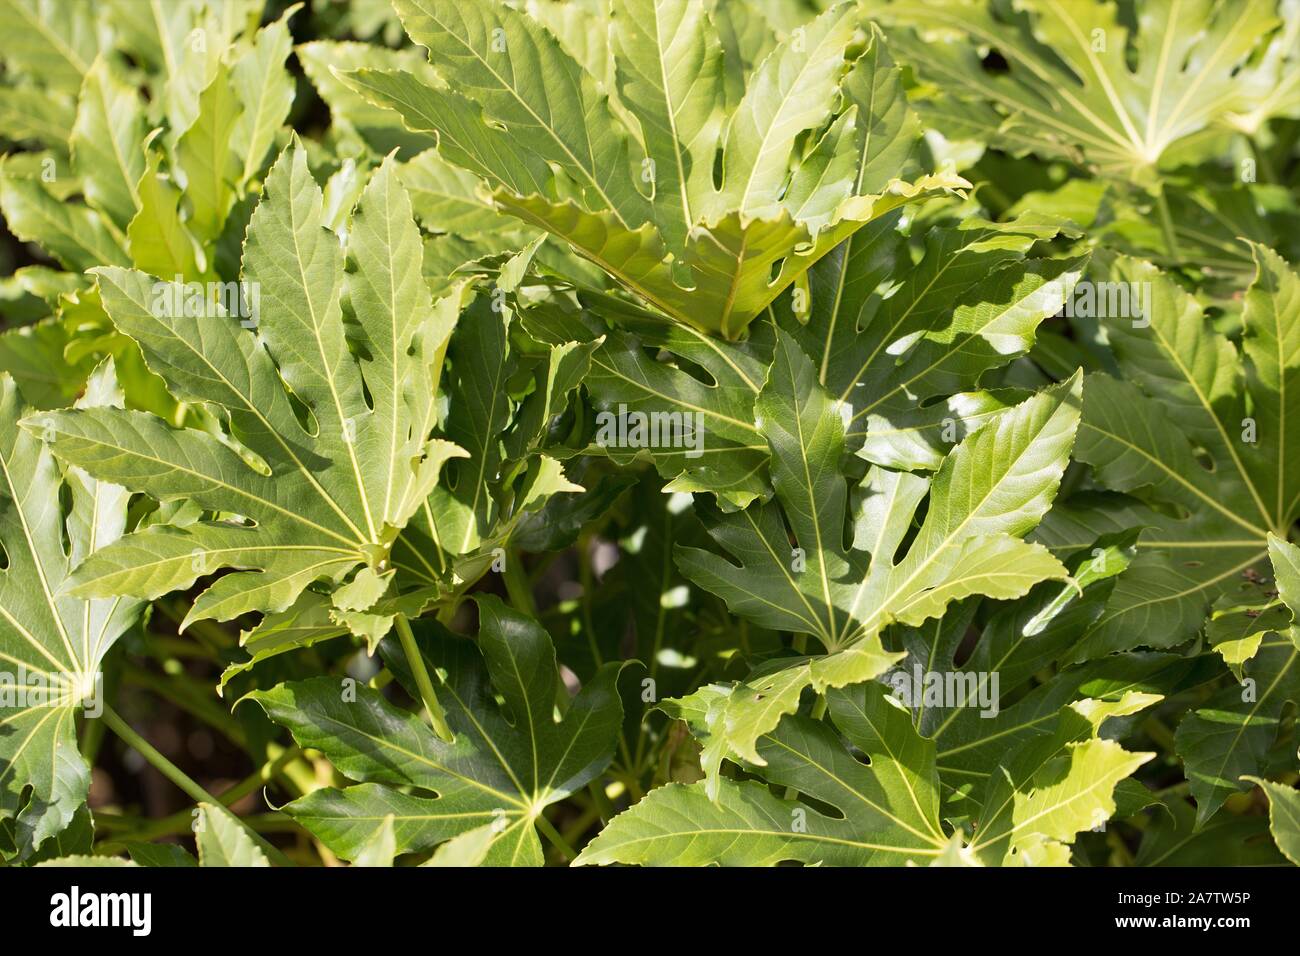 Fatsia japonica, also known as glossy-leaf paper plant, fatsi, paperplant, false castor oil plant, or Japanese aralia. Stock Photo